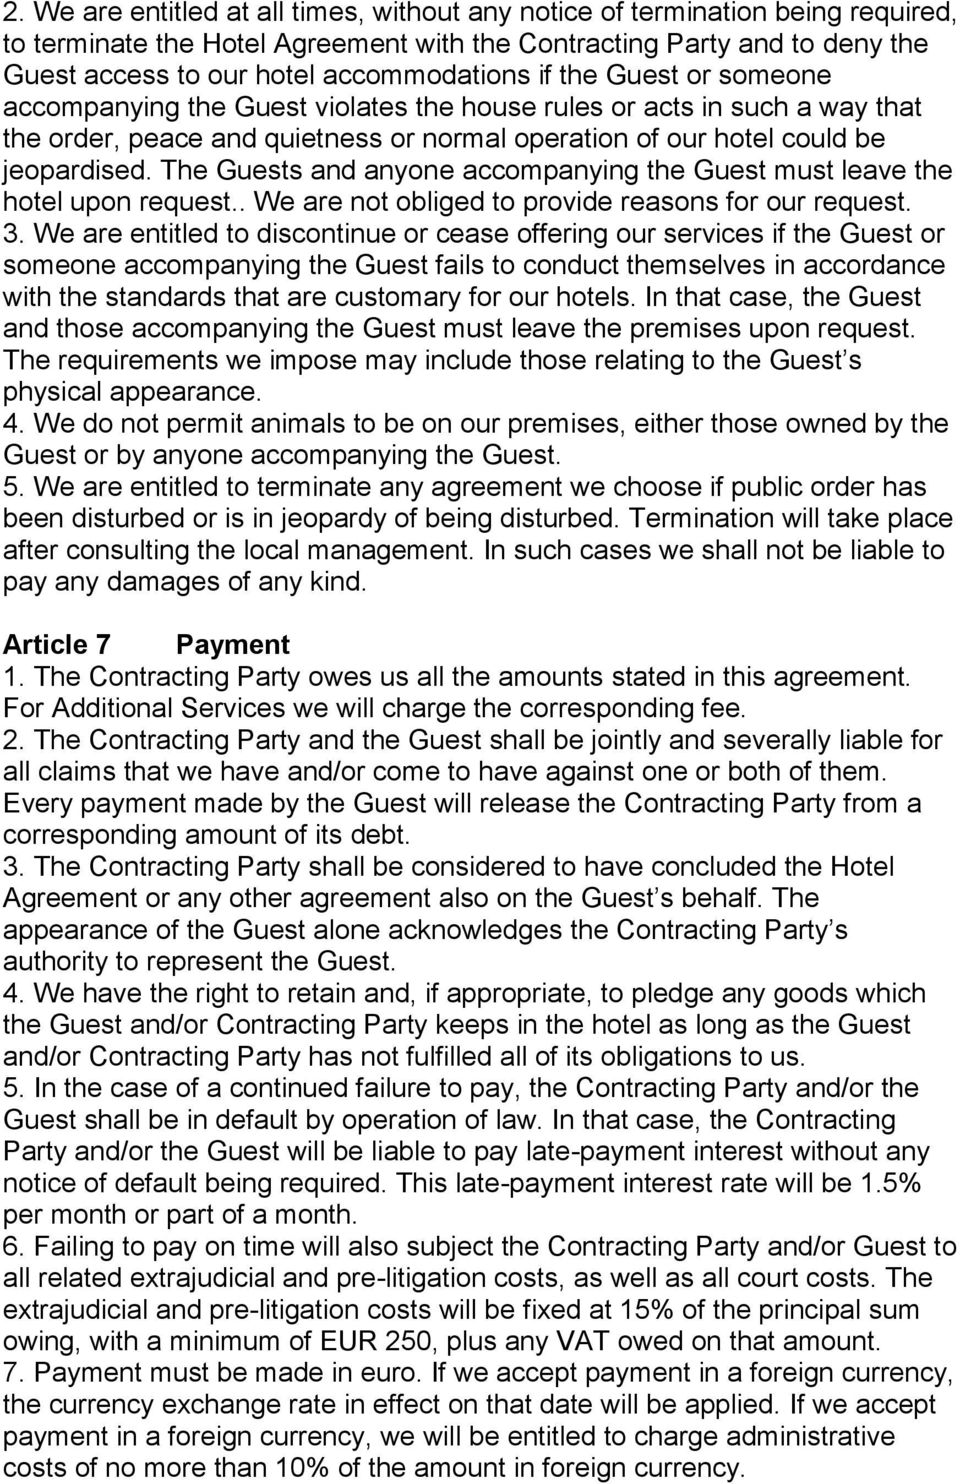 The Guests and anyone accompanying the Guest must leave the hotel upon request.. We are not obliged to provide reasons for our request. 3.